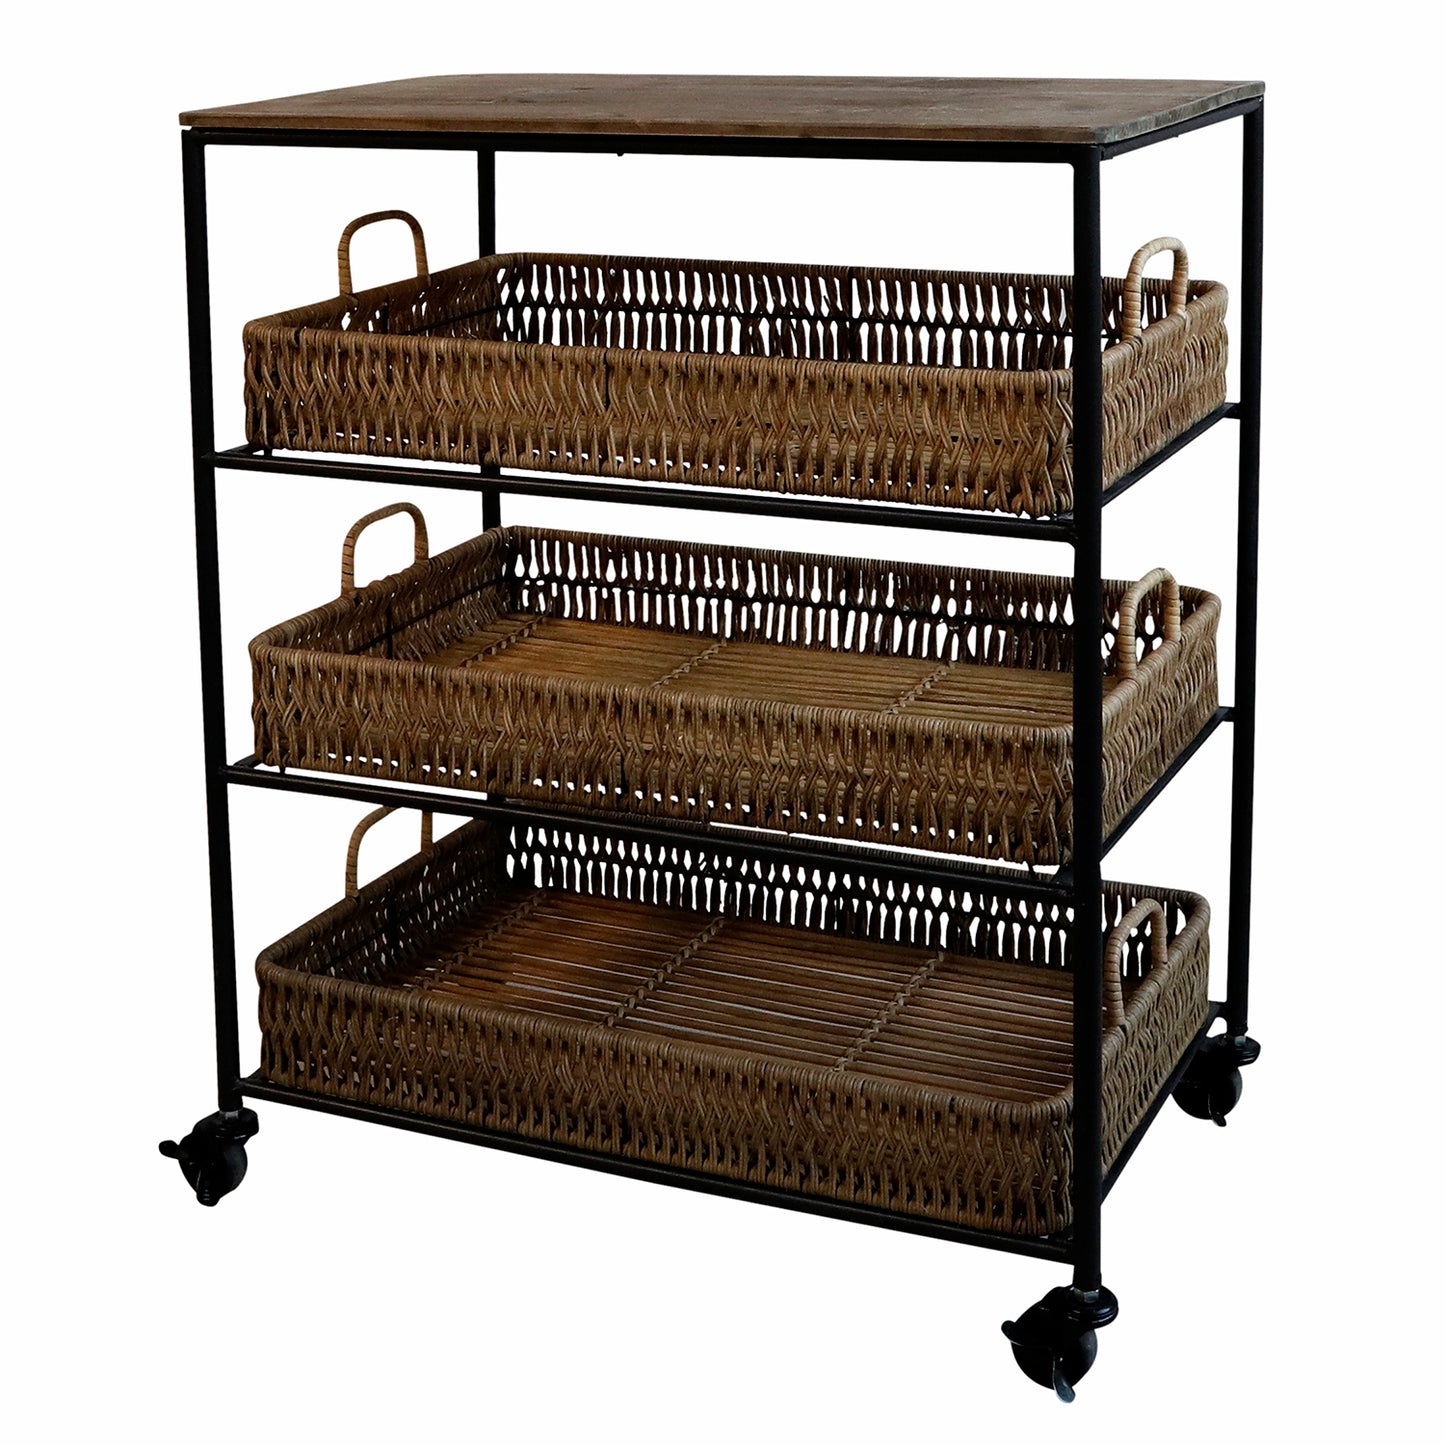 Rustic Style Trolley On Wheels with Wicker Trays